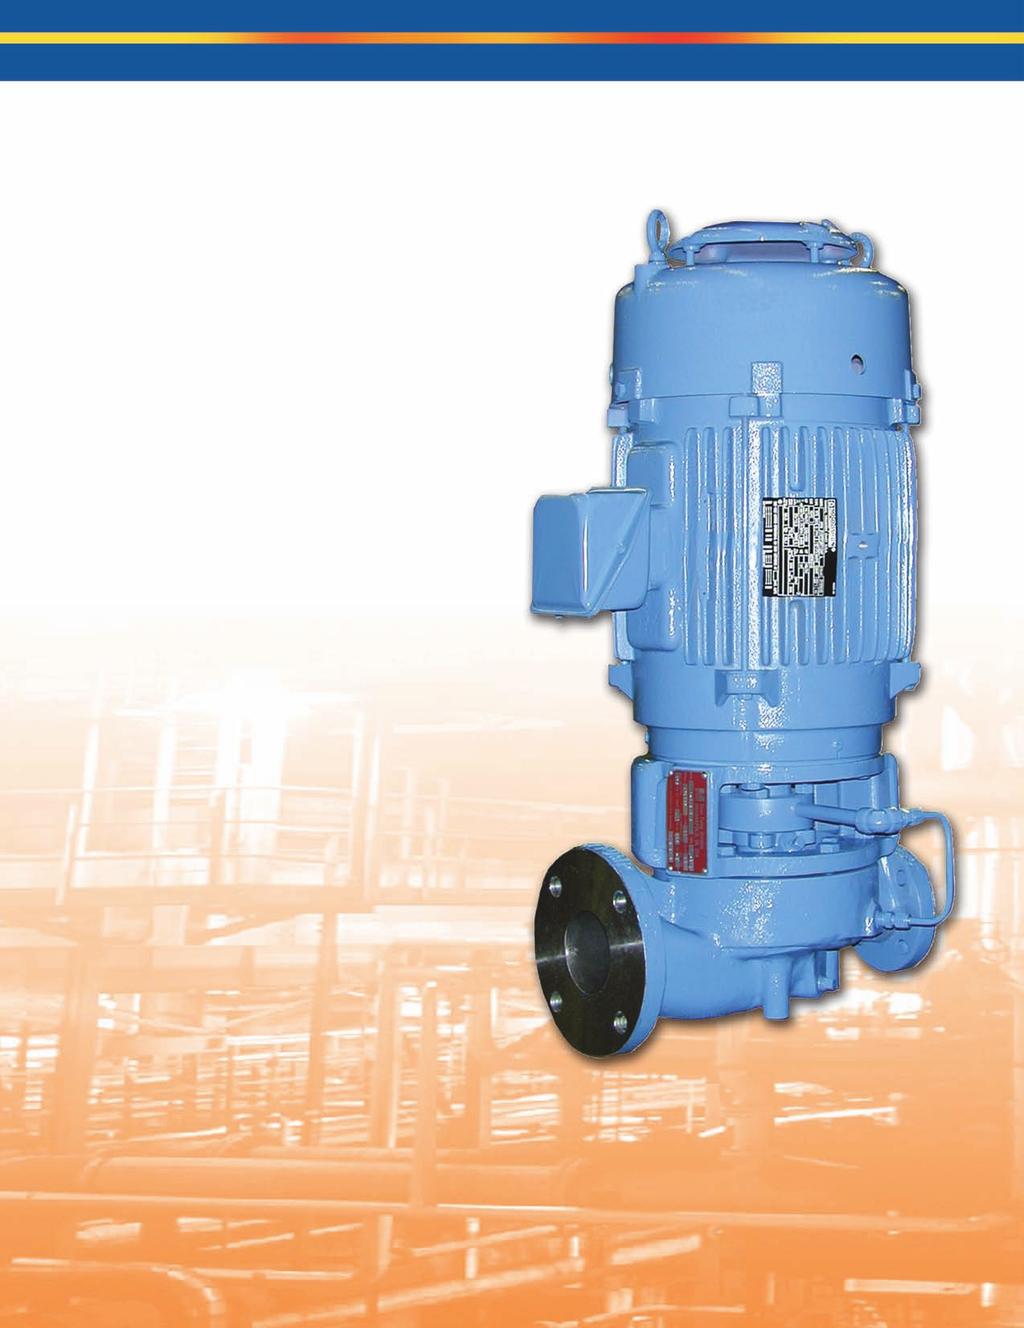 Series DL High Temperature Chemical Process Inline Pumps Capacities to 6 GPM (182 m 3 /hr) Heads to feet (167 m) Pumping Temperatures to ºF (288ºC) Working Pressures to 27 PSIG (1,896 kpa) Seven